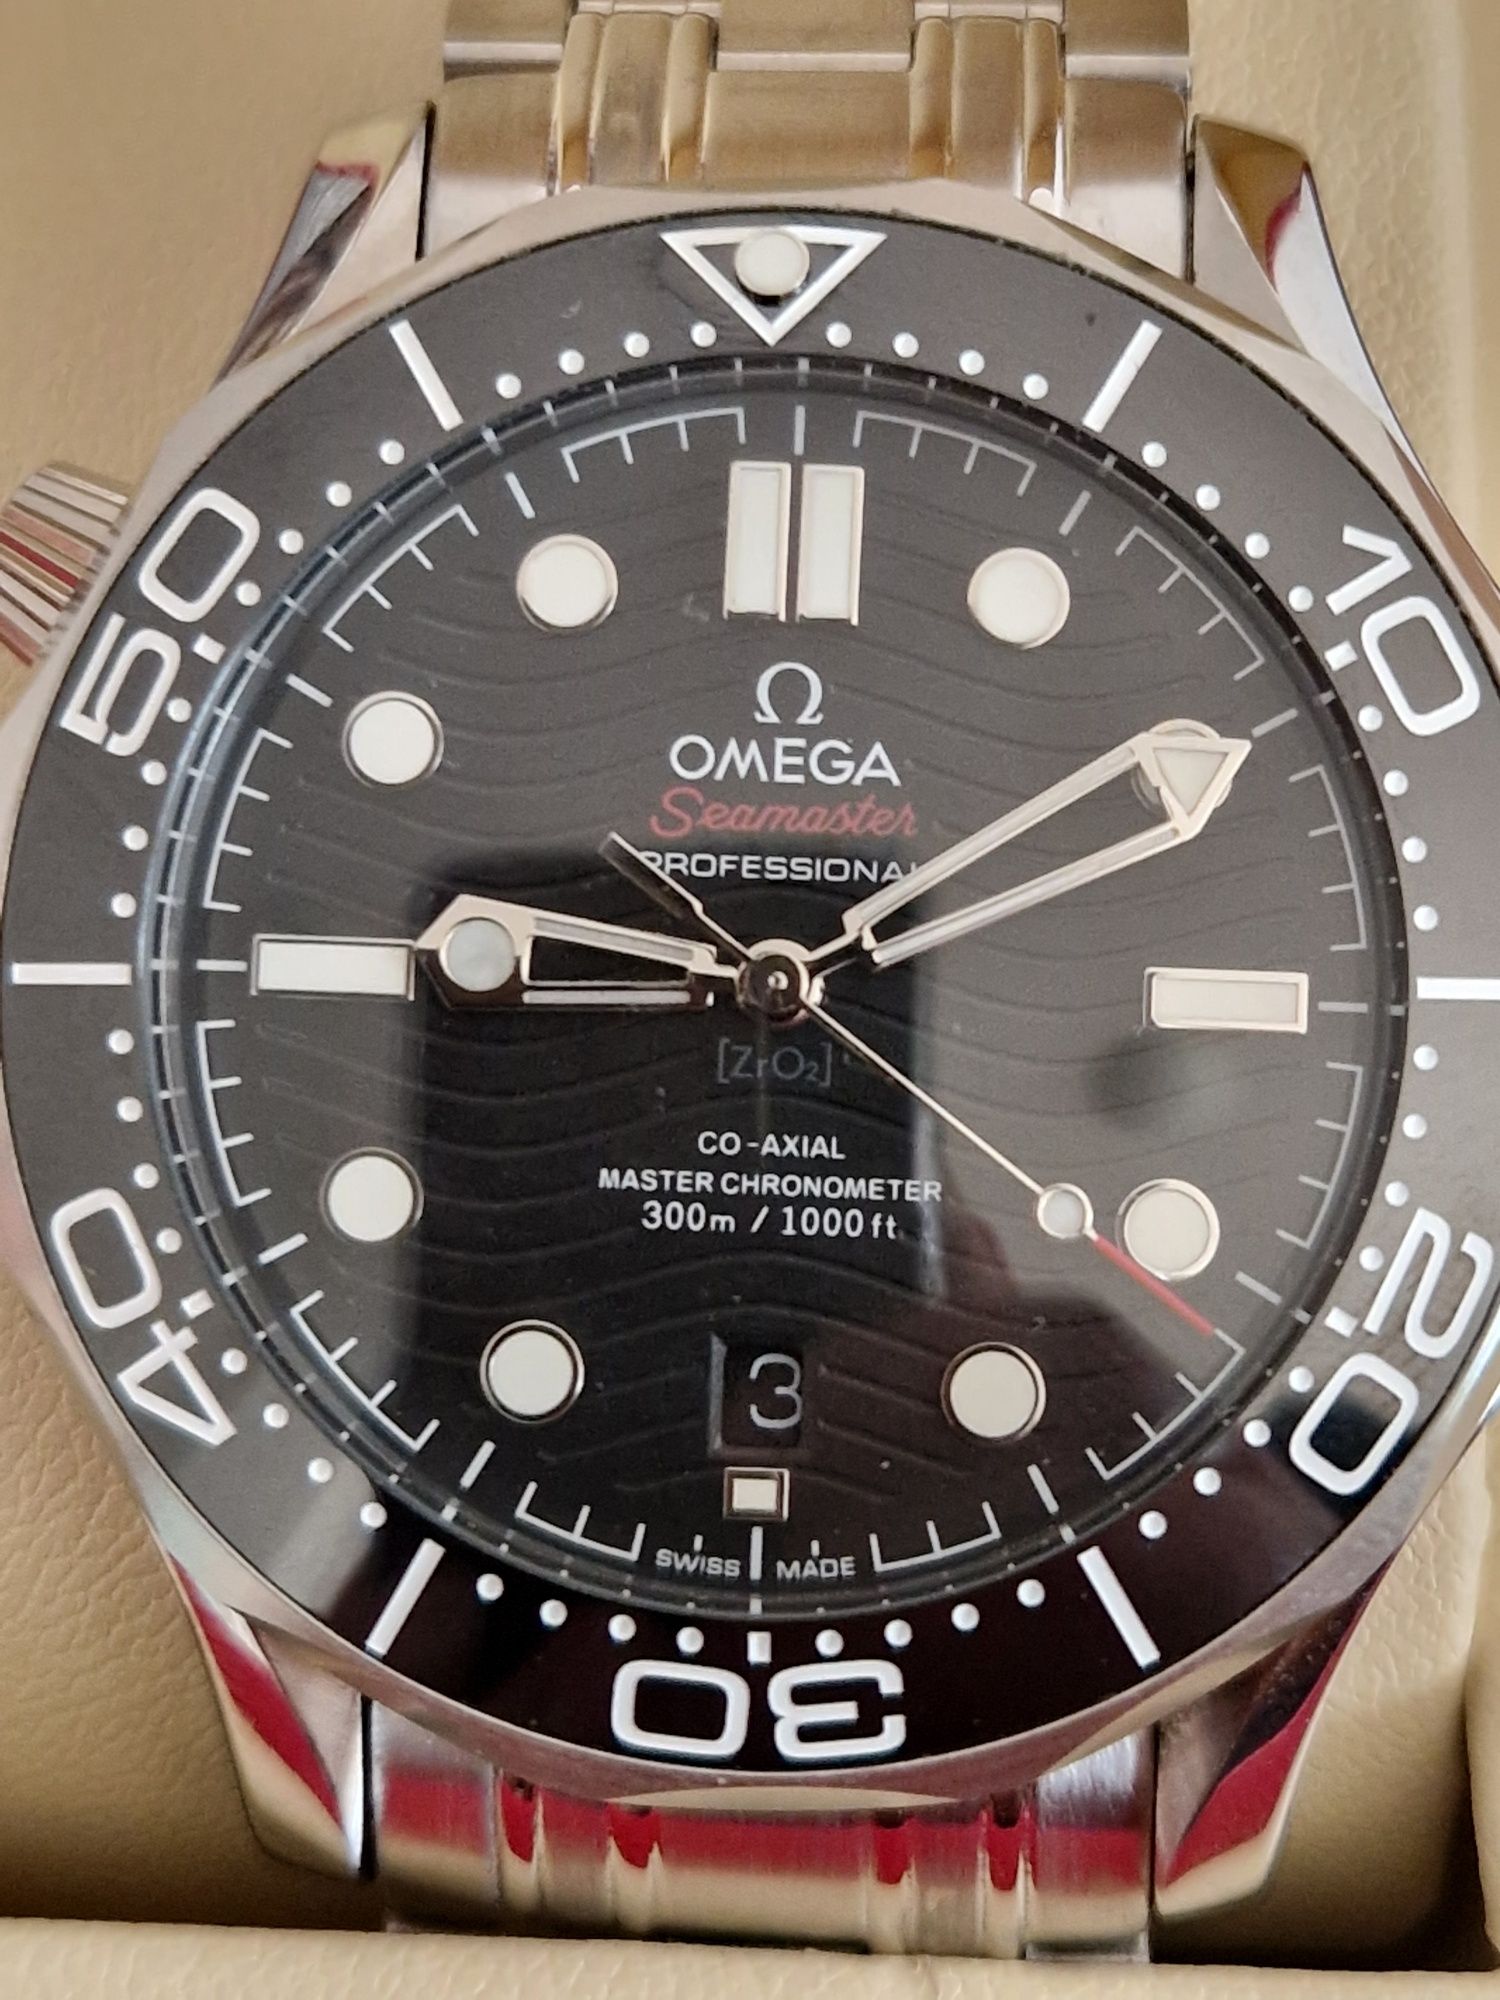 Omega Seamaster Co-Axial Automatic Chronograph Diver 300M